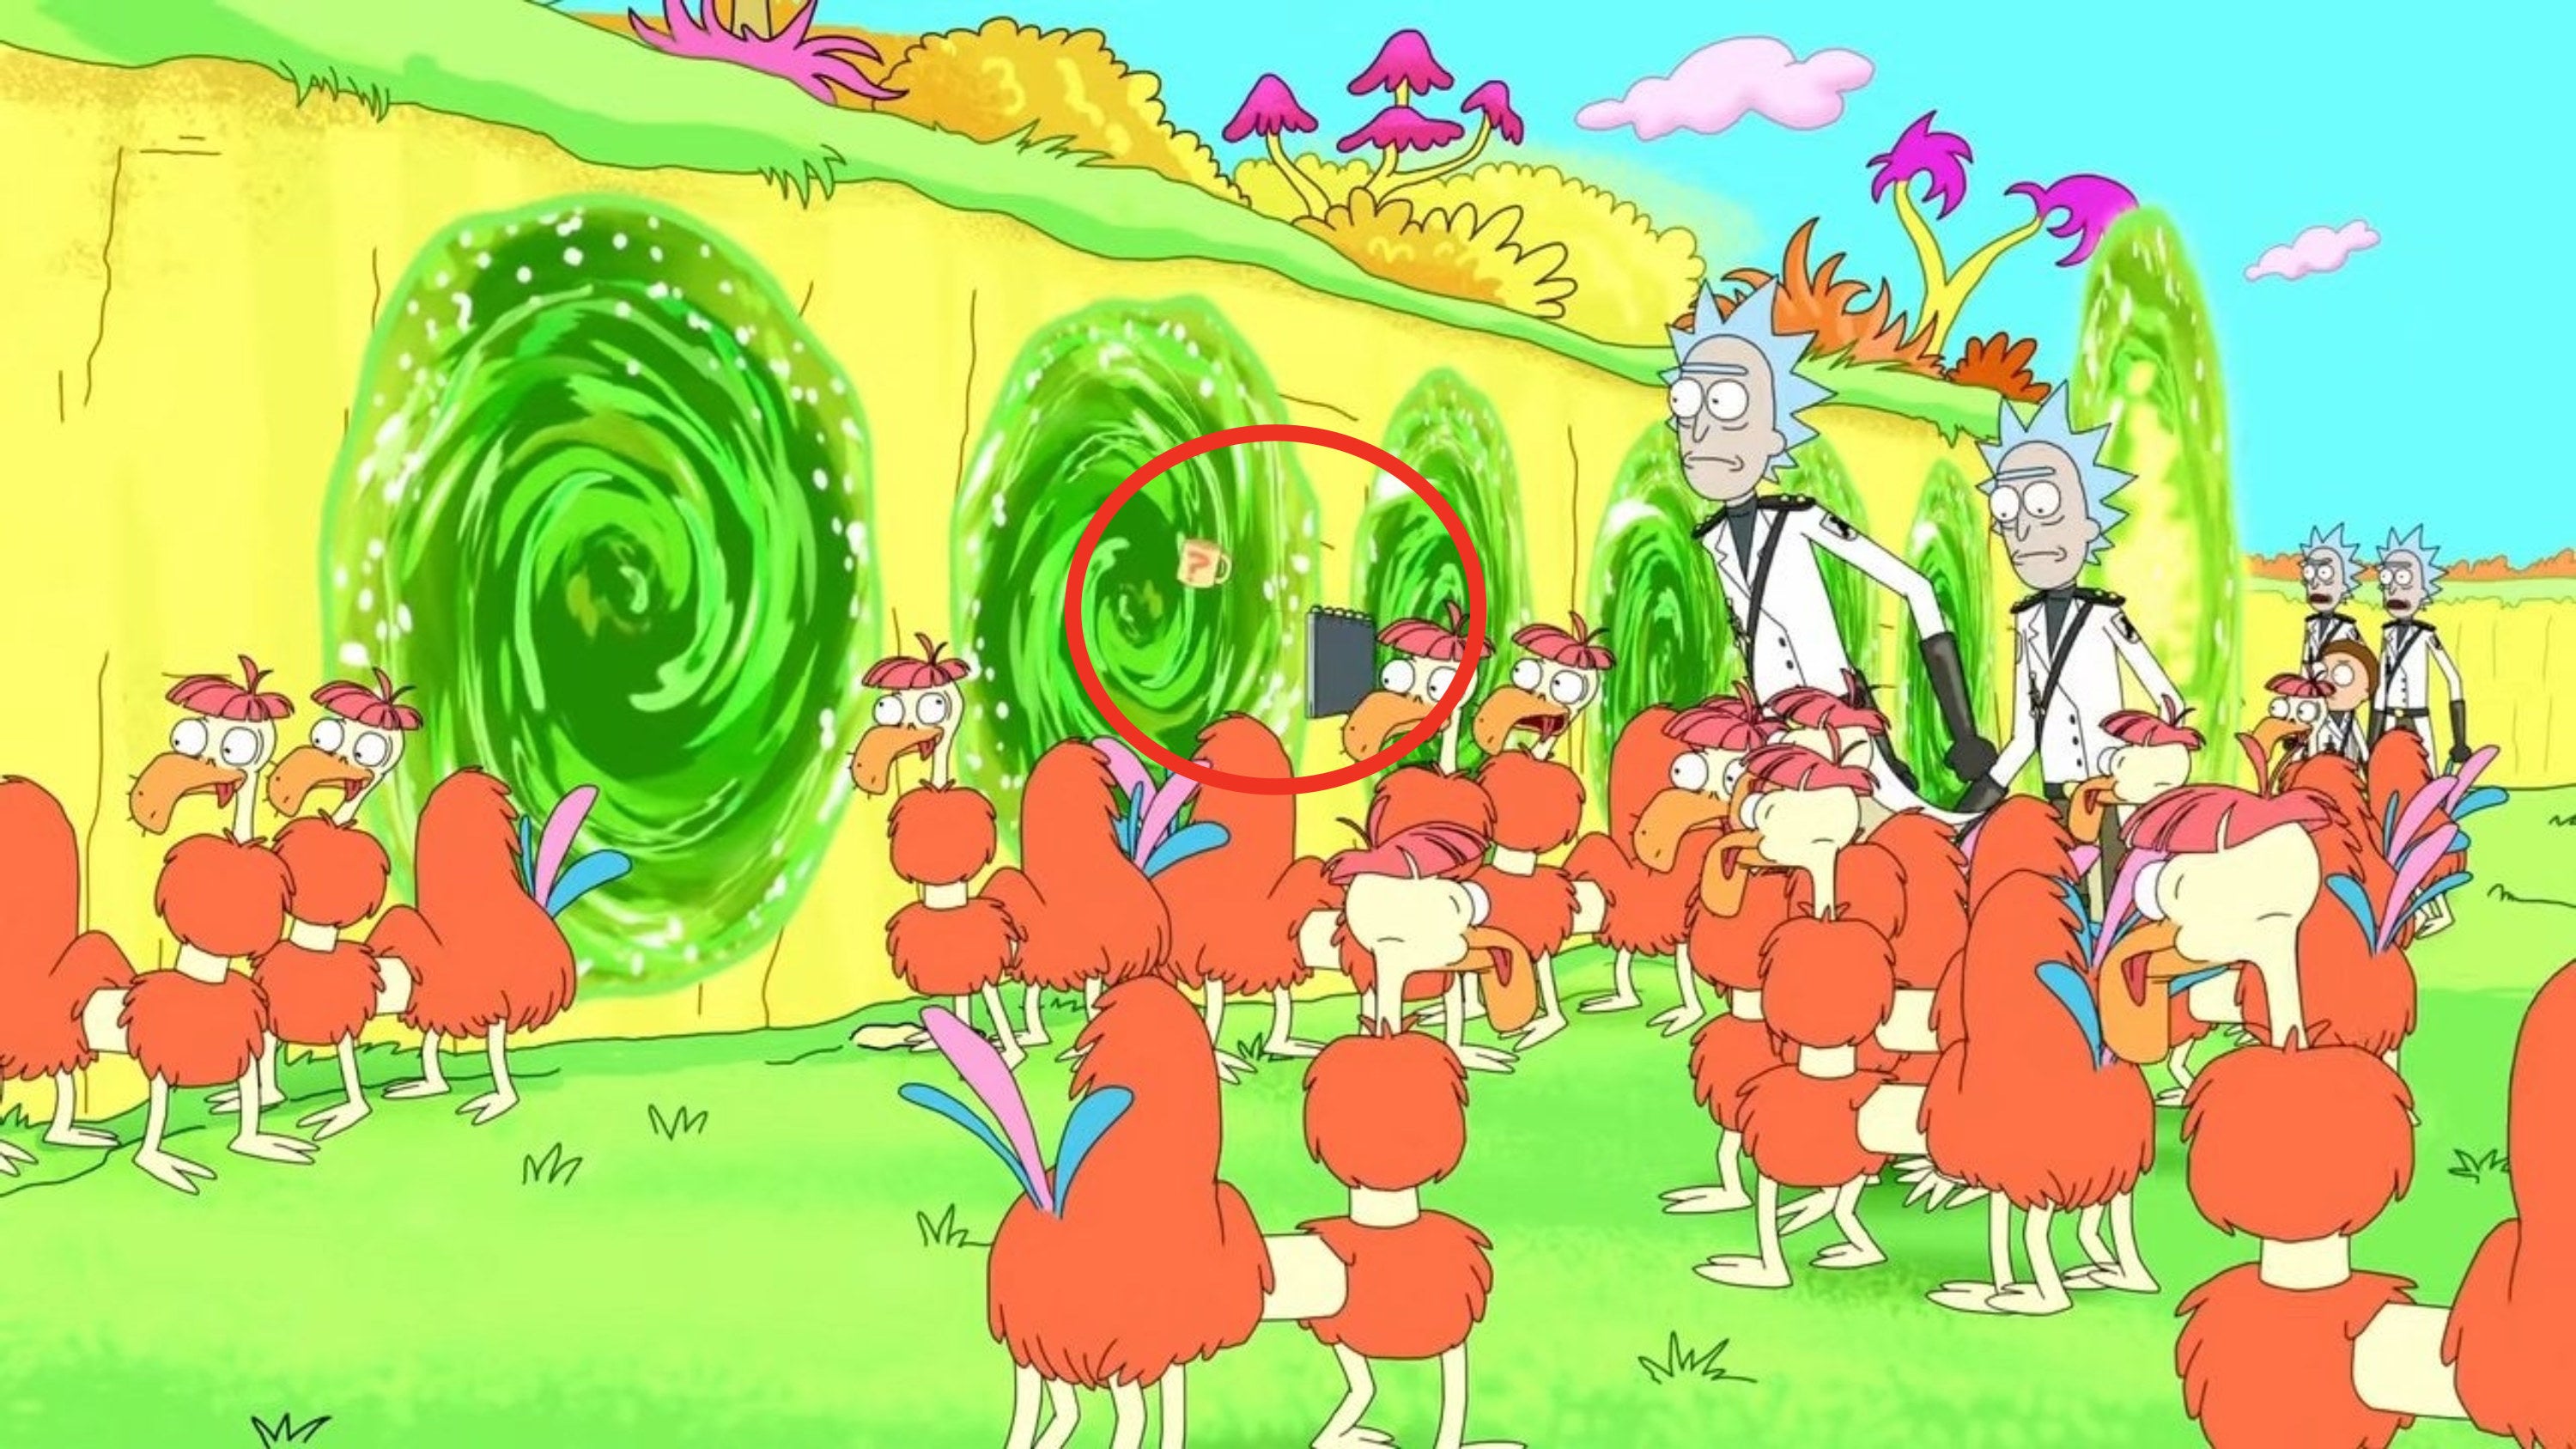 Ricks walking through a field of ostrich-like creatures next to multiple portals in &quot;Rick and Morty&quot;